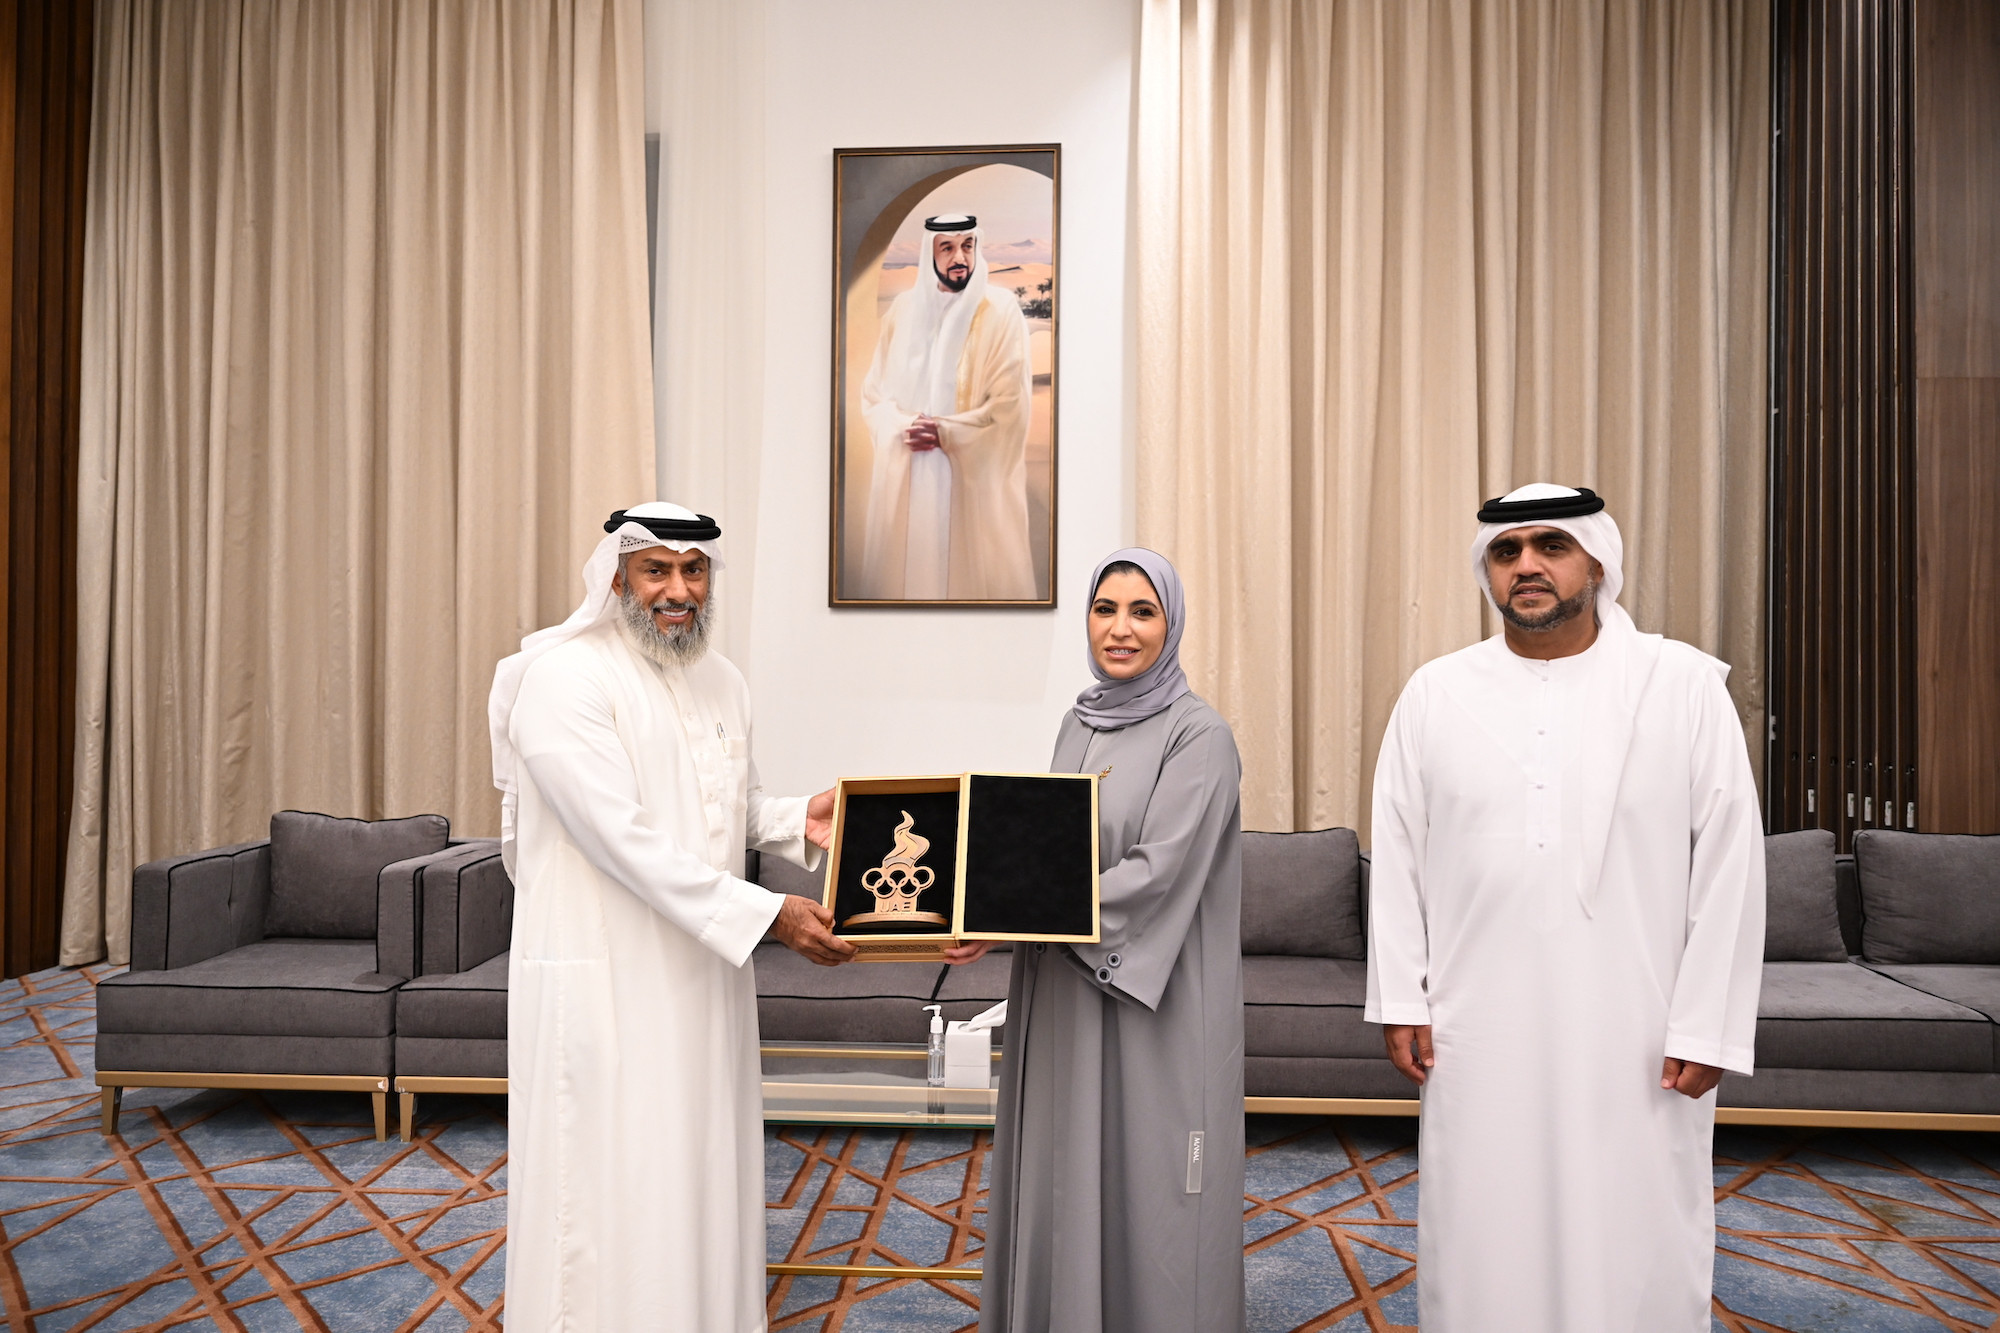 The UAE NOC held a gathering to discuss sports ethics and Olympic values ©UAE NOC